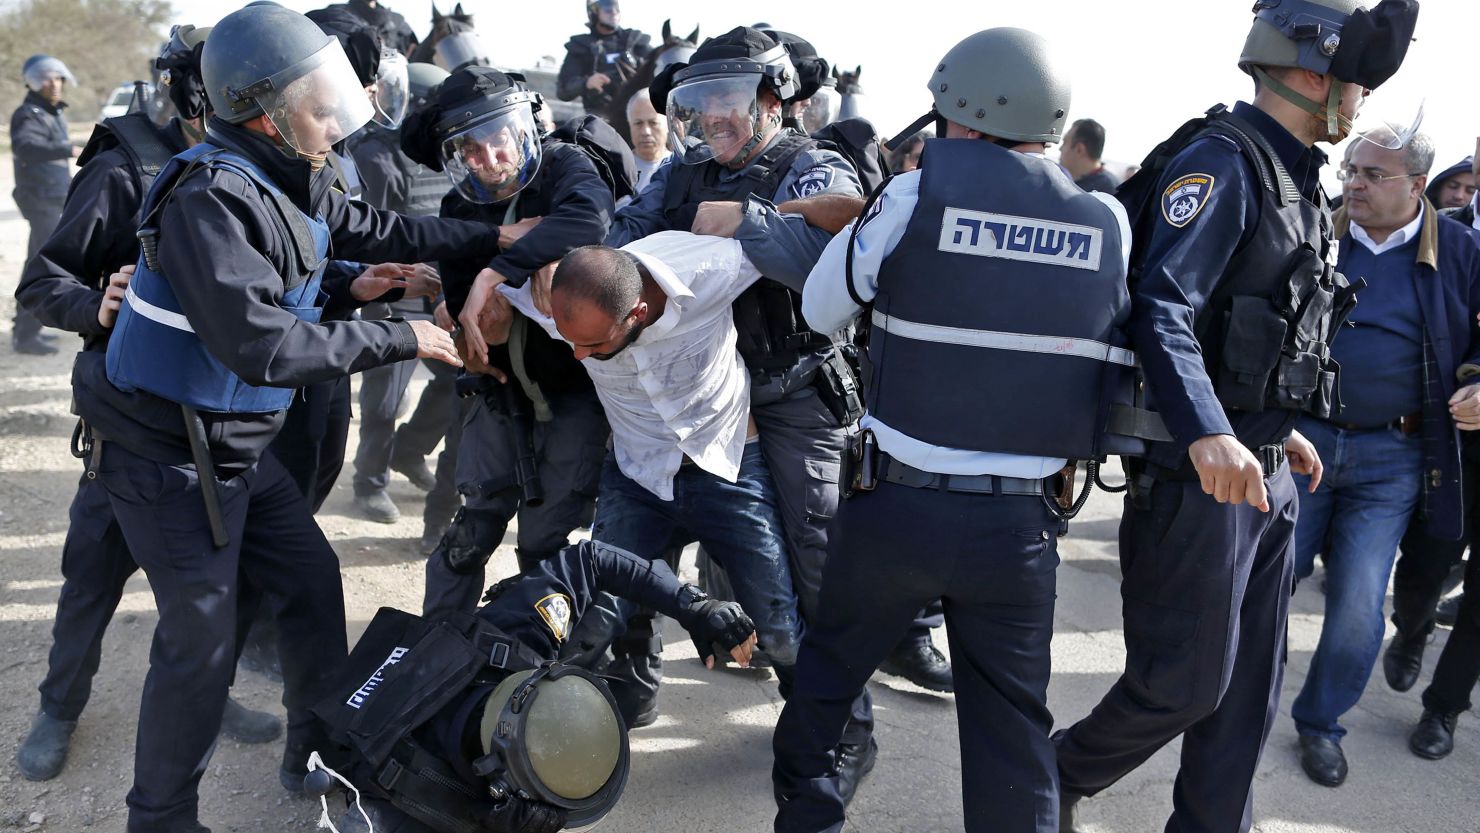 Israeli policemen clash with a Bedouin man following a protest in the Negev Desert on Wednesday.